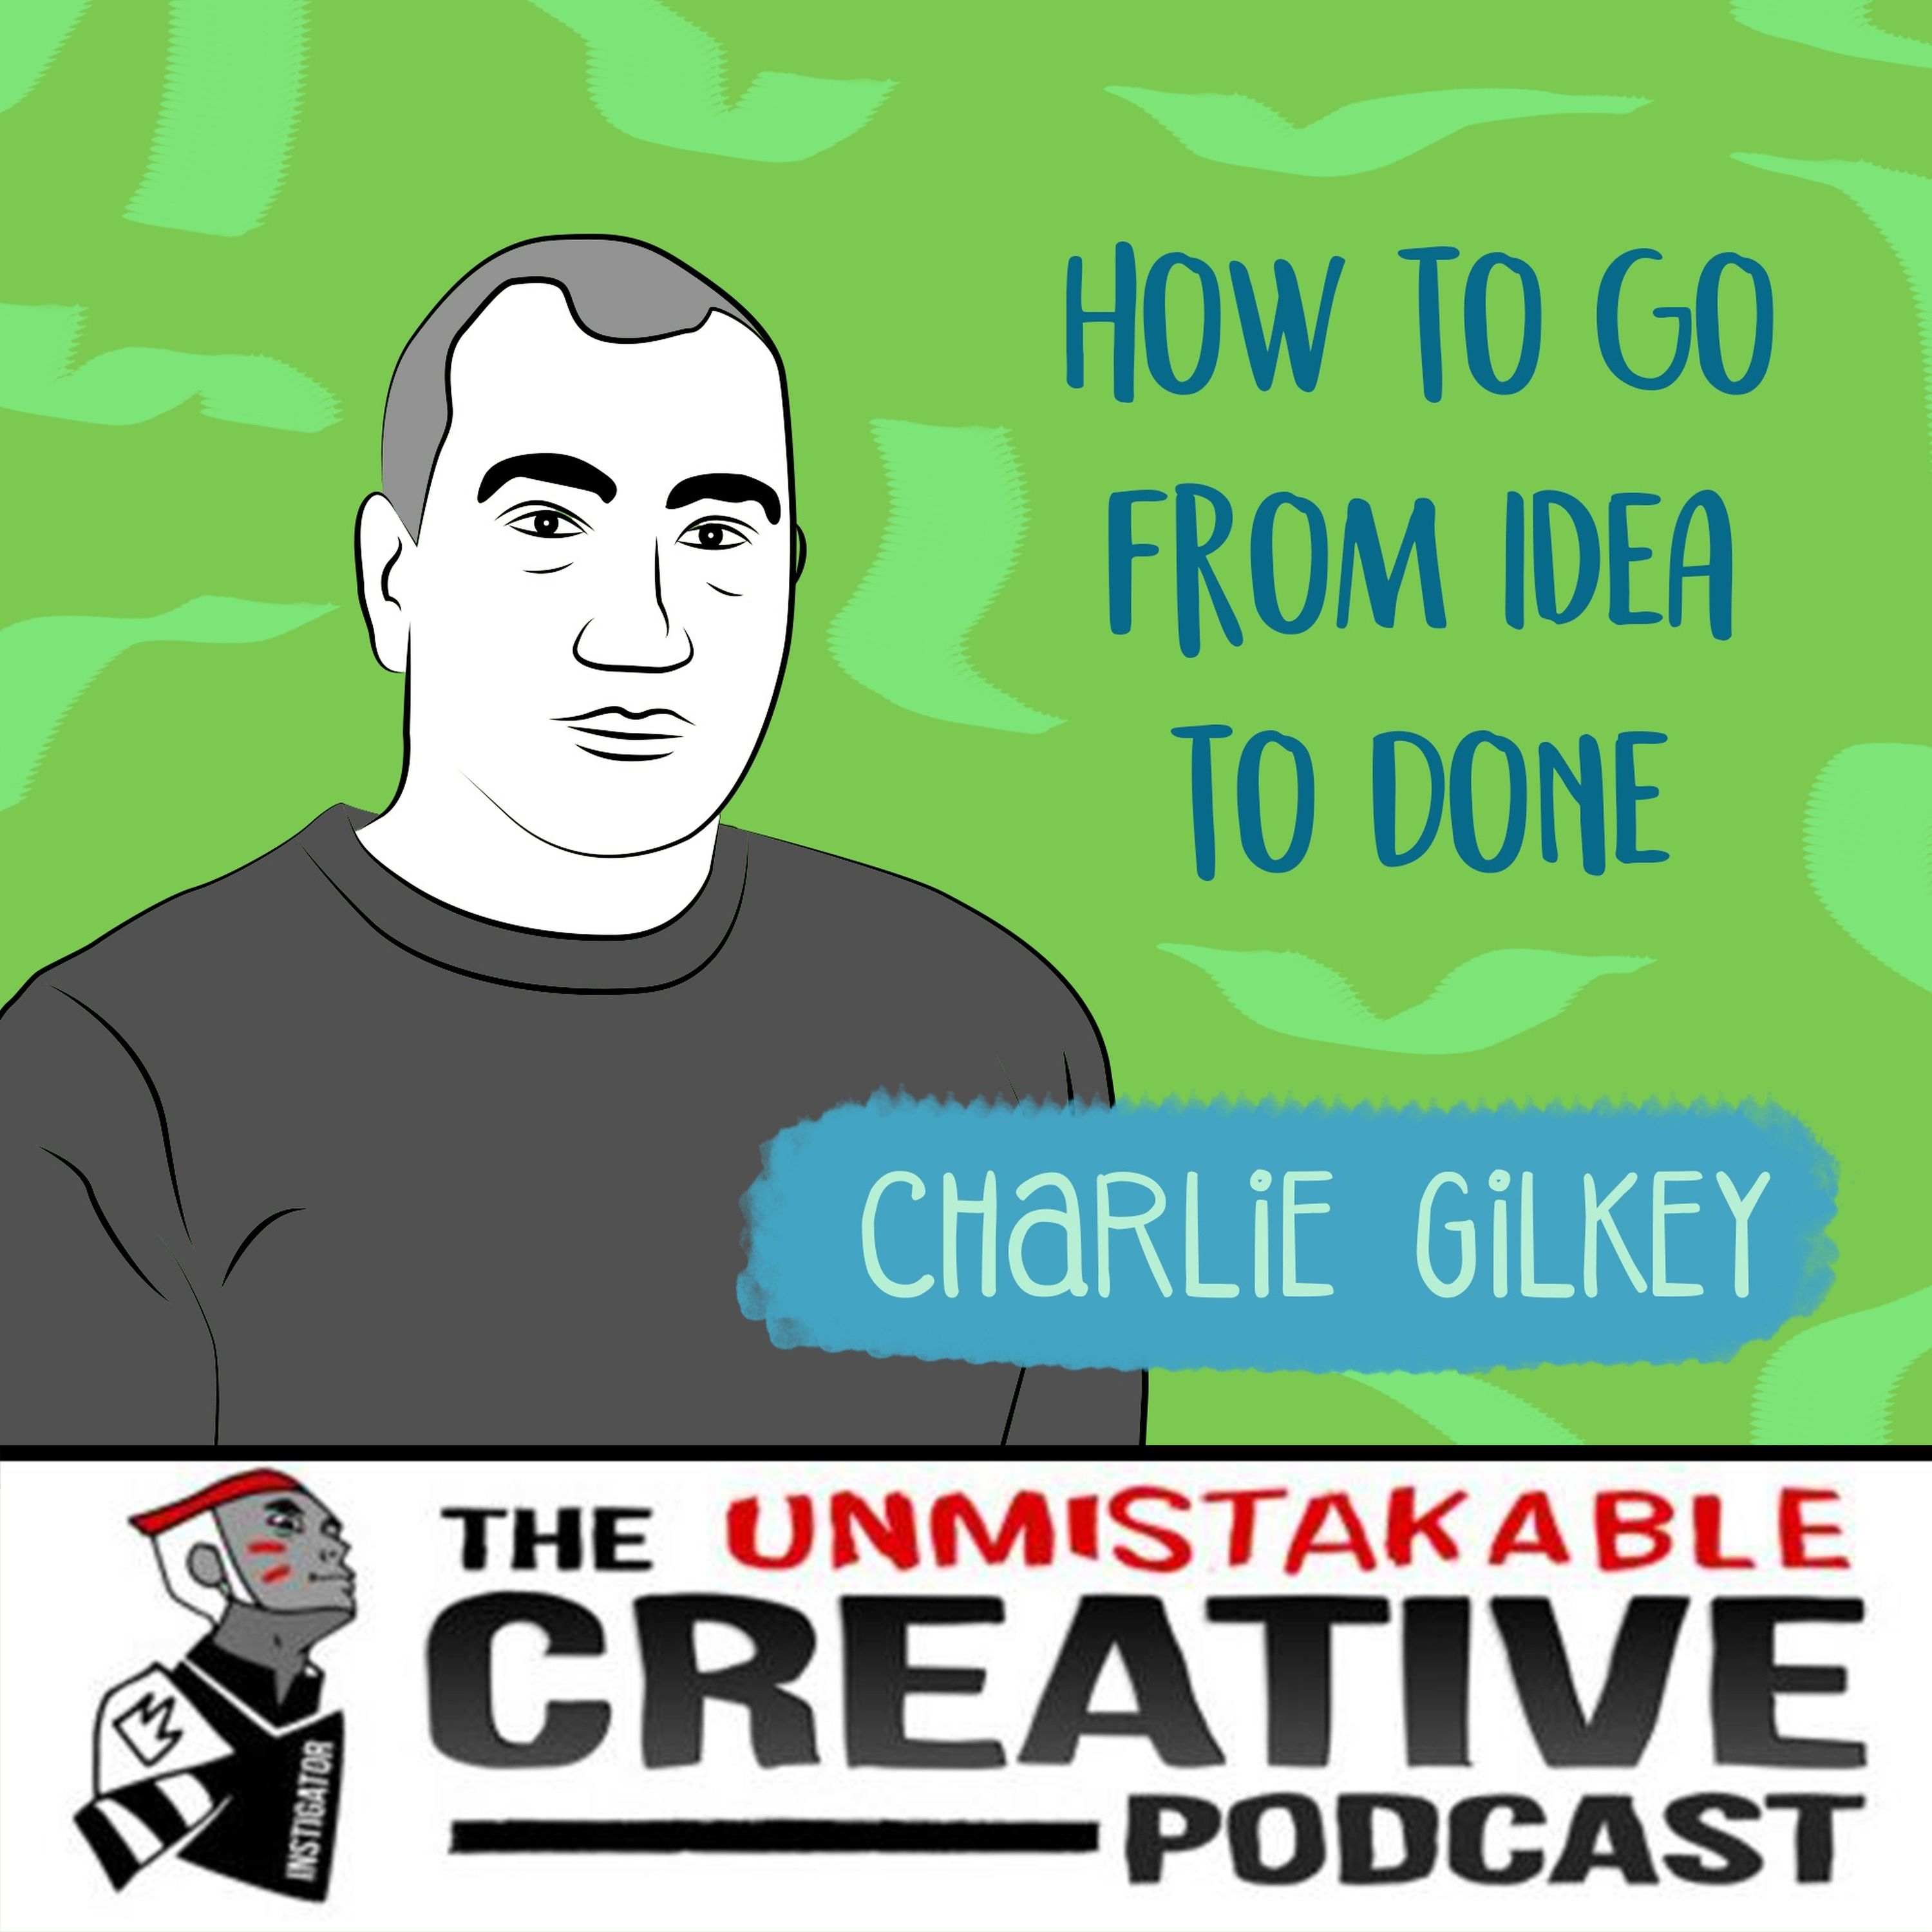 Charlie Gilkey: How to Go from Idea to Done Image